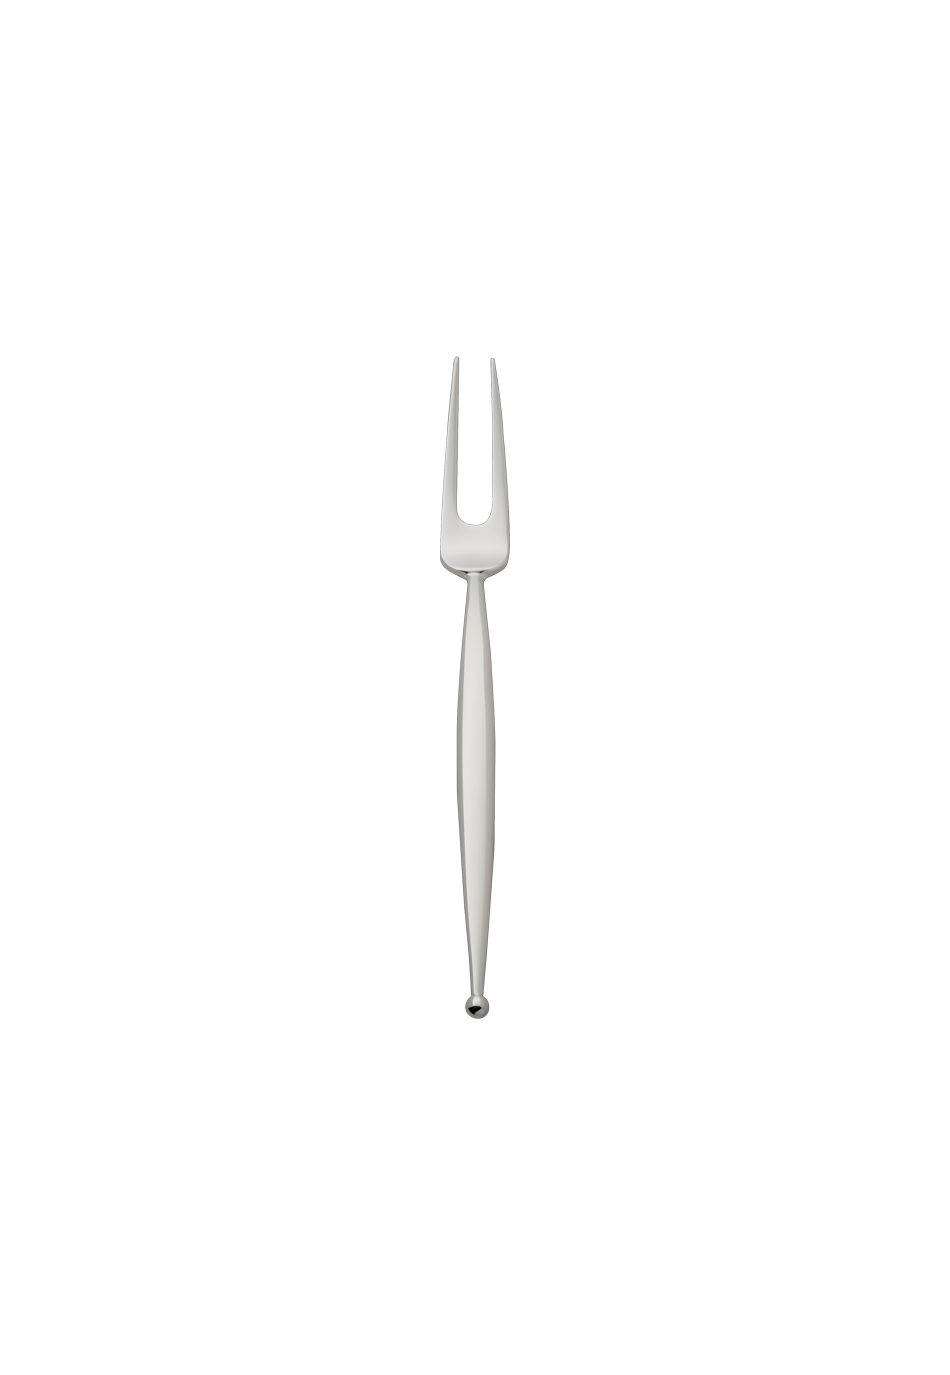 Gio Meat Fork, small (150g massive silverplated)